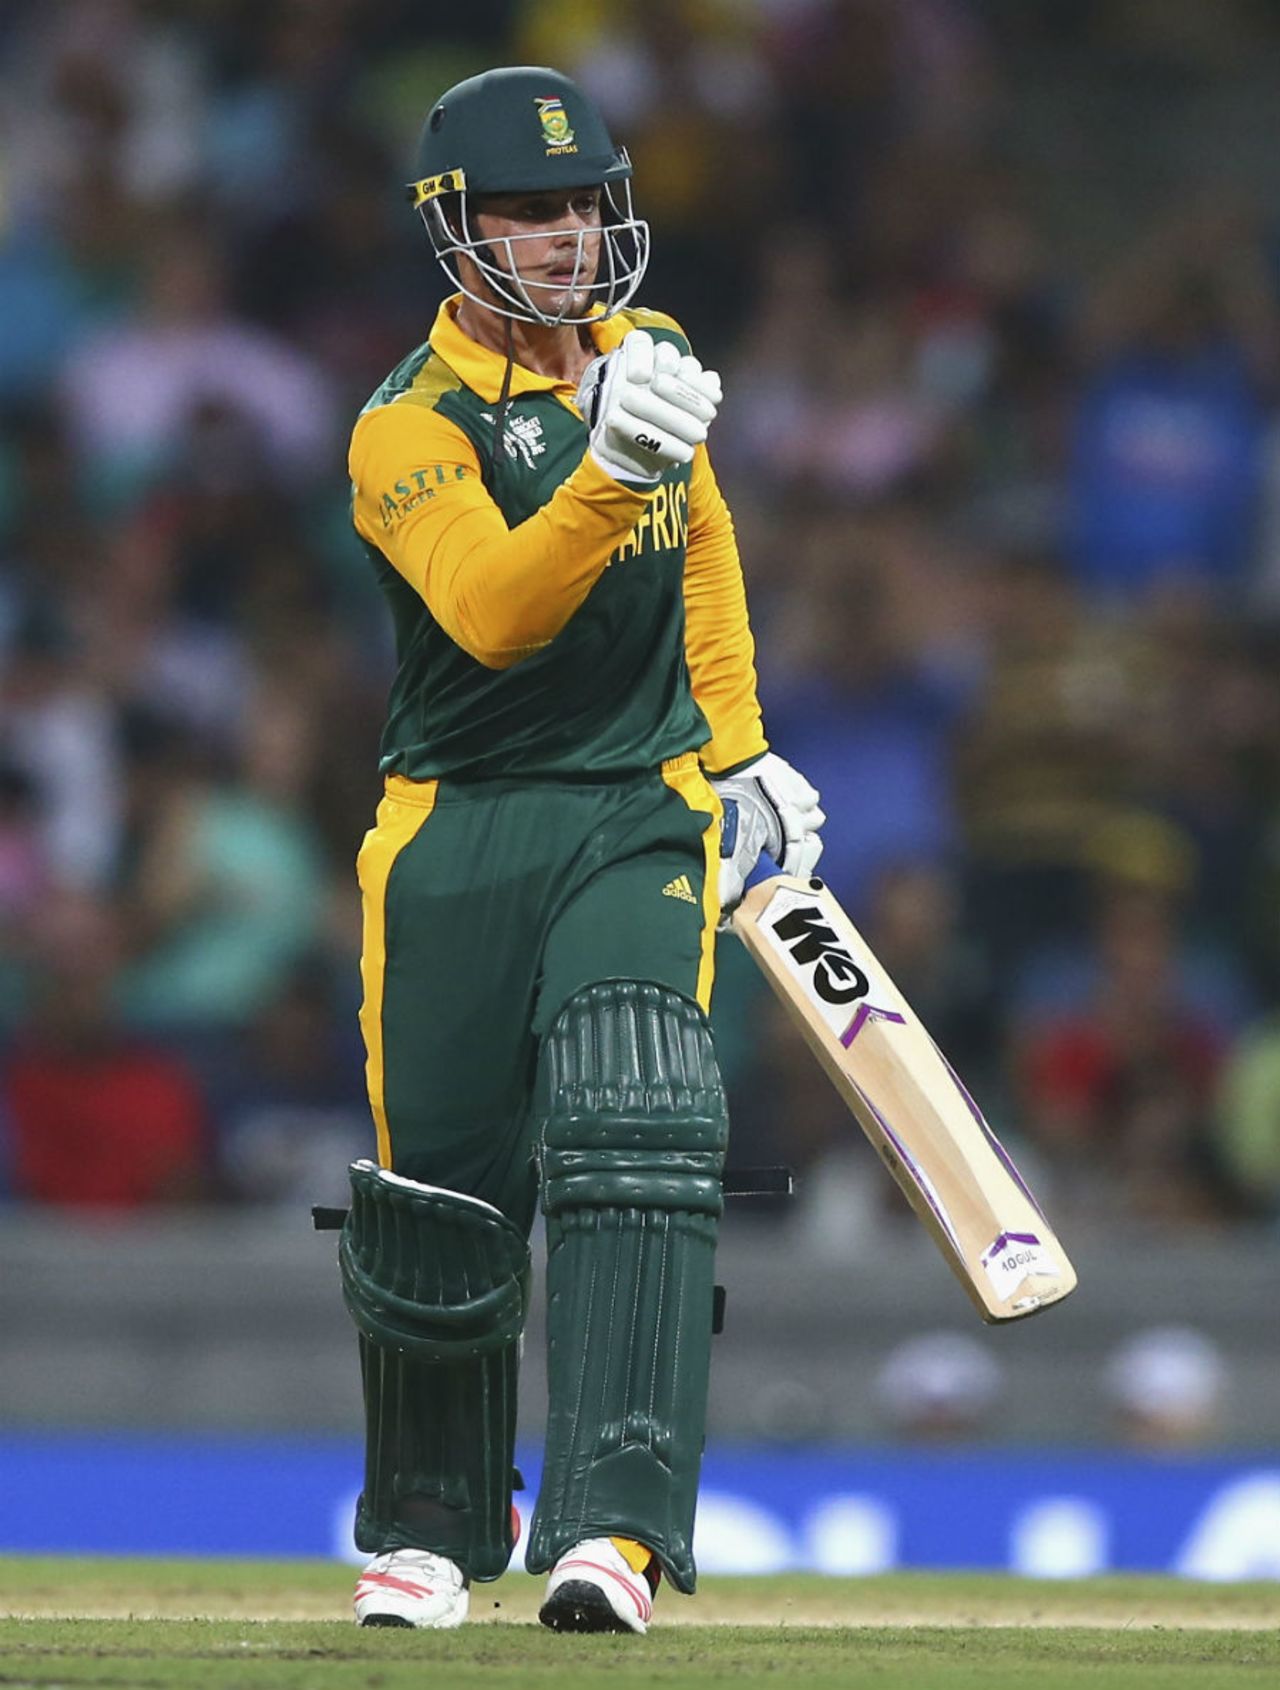 Quinton de Kock celebrates his first fifty of the World Cup, South Africa v Sri Lanka, World Cup 2015, 1st quarter-final, Sydney, March 18, 2015

